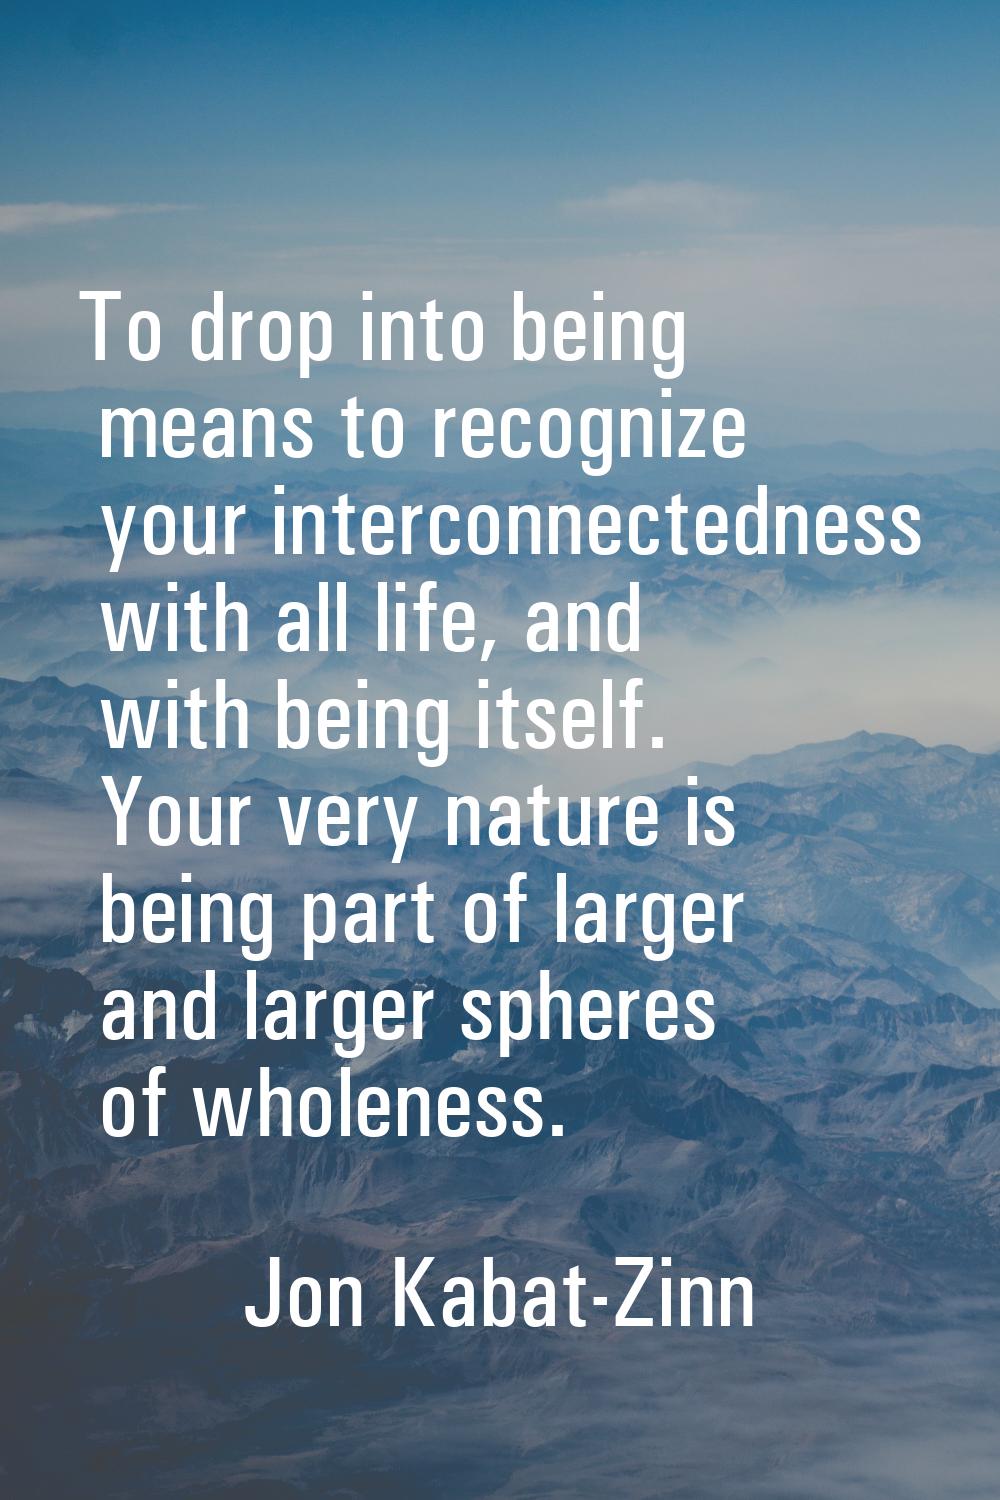 To drop into being means to recognize your interconnectedness with all life, and with being itself.